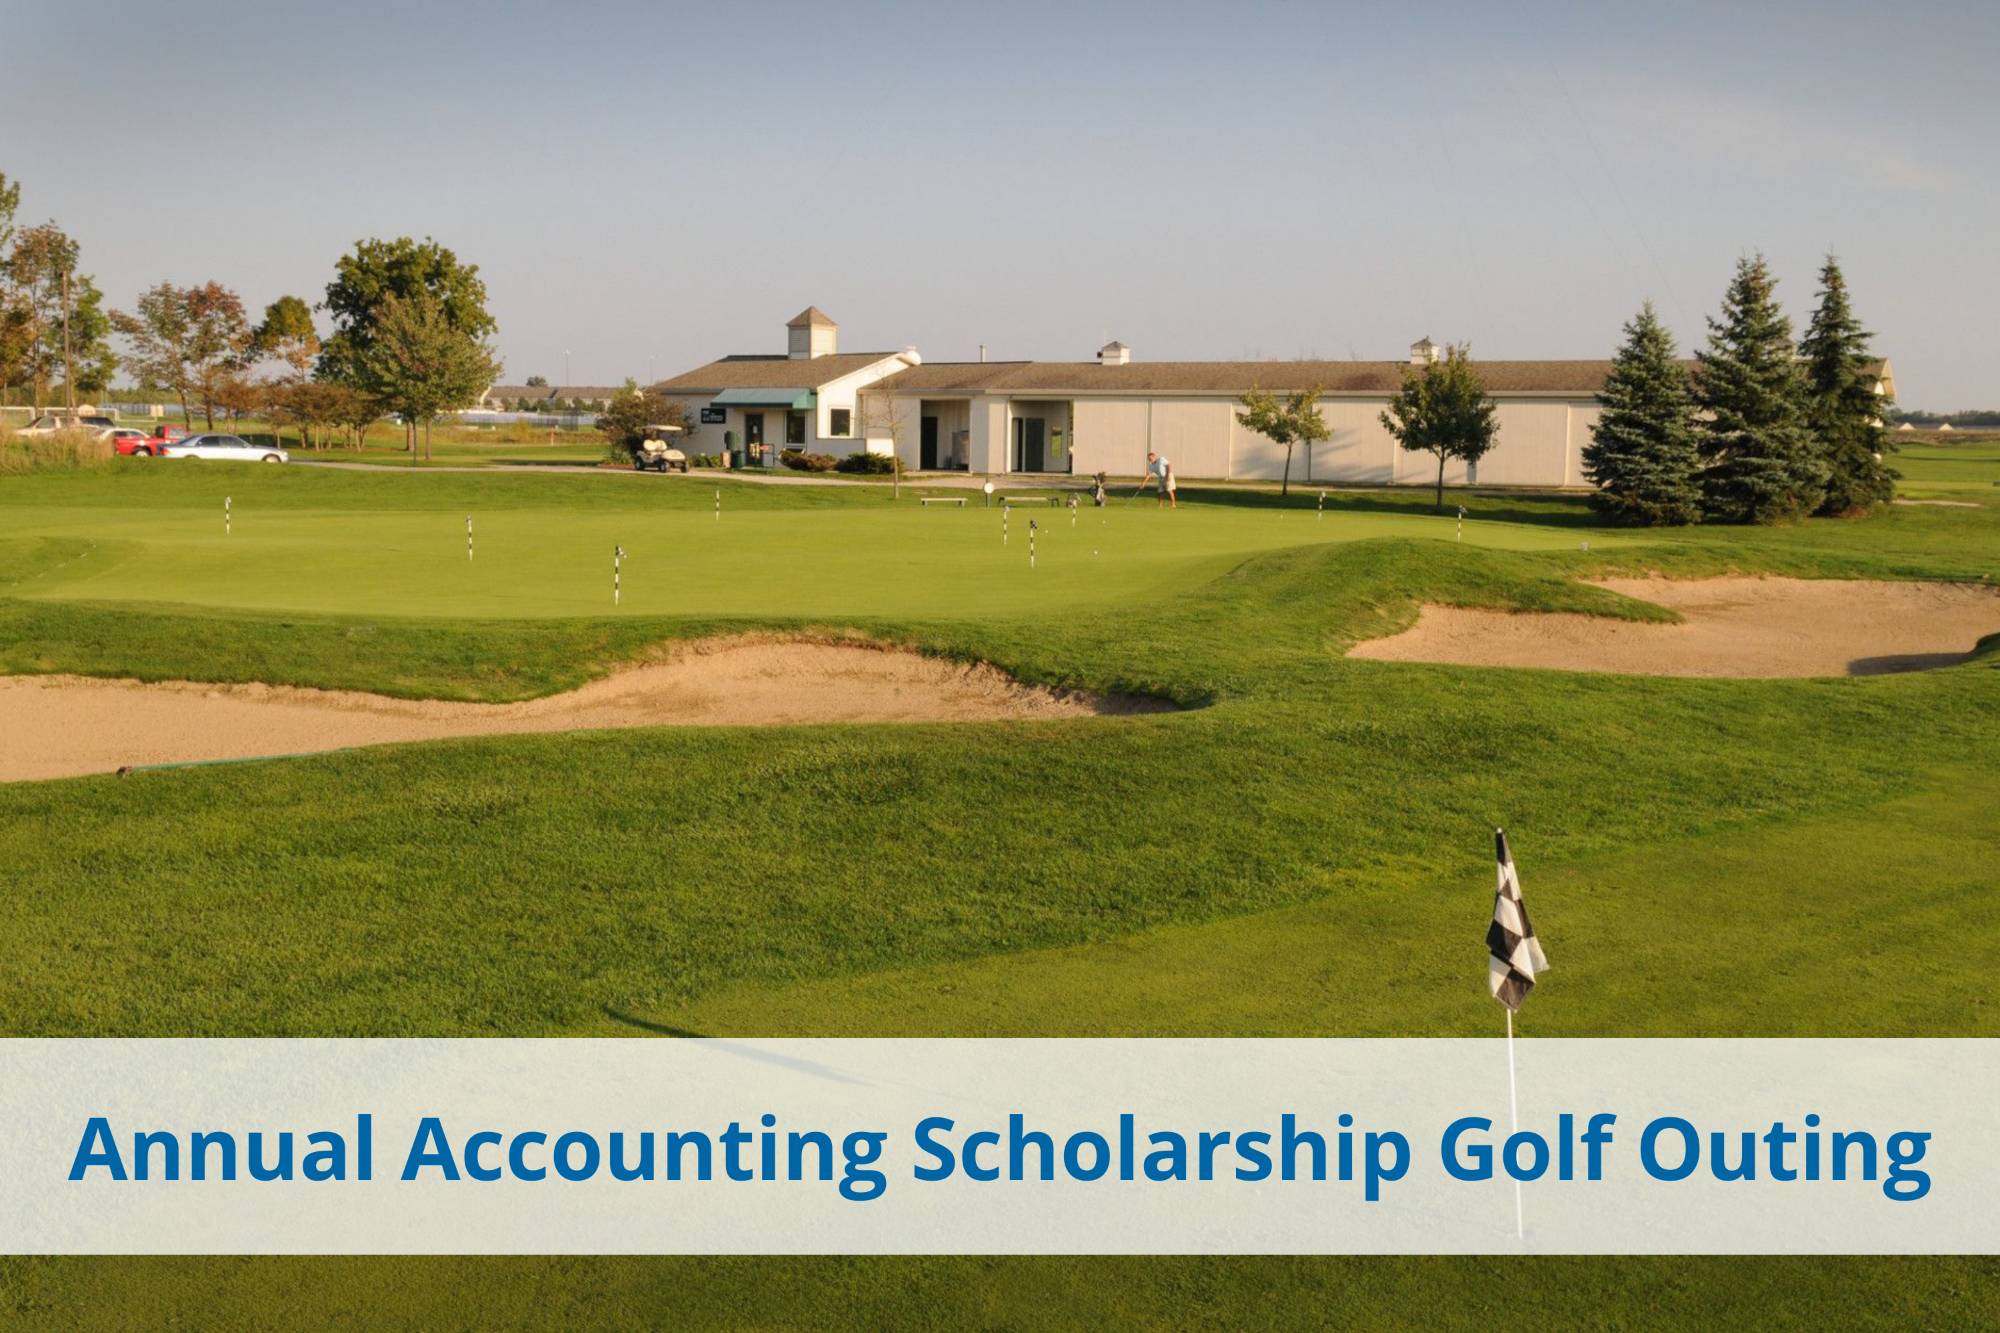 Annual accounting scholarship golf outing